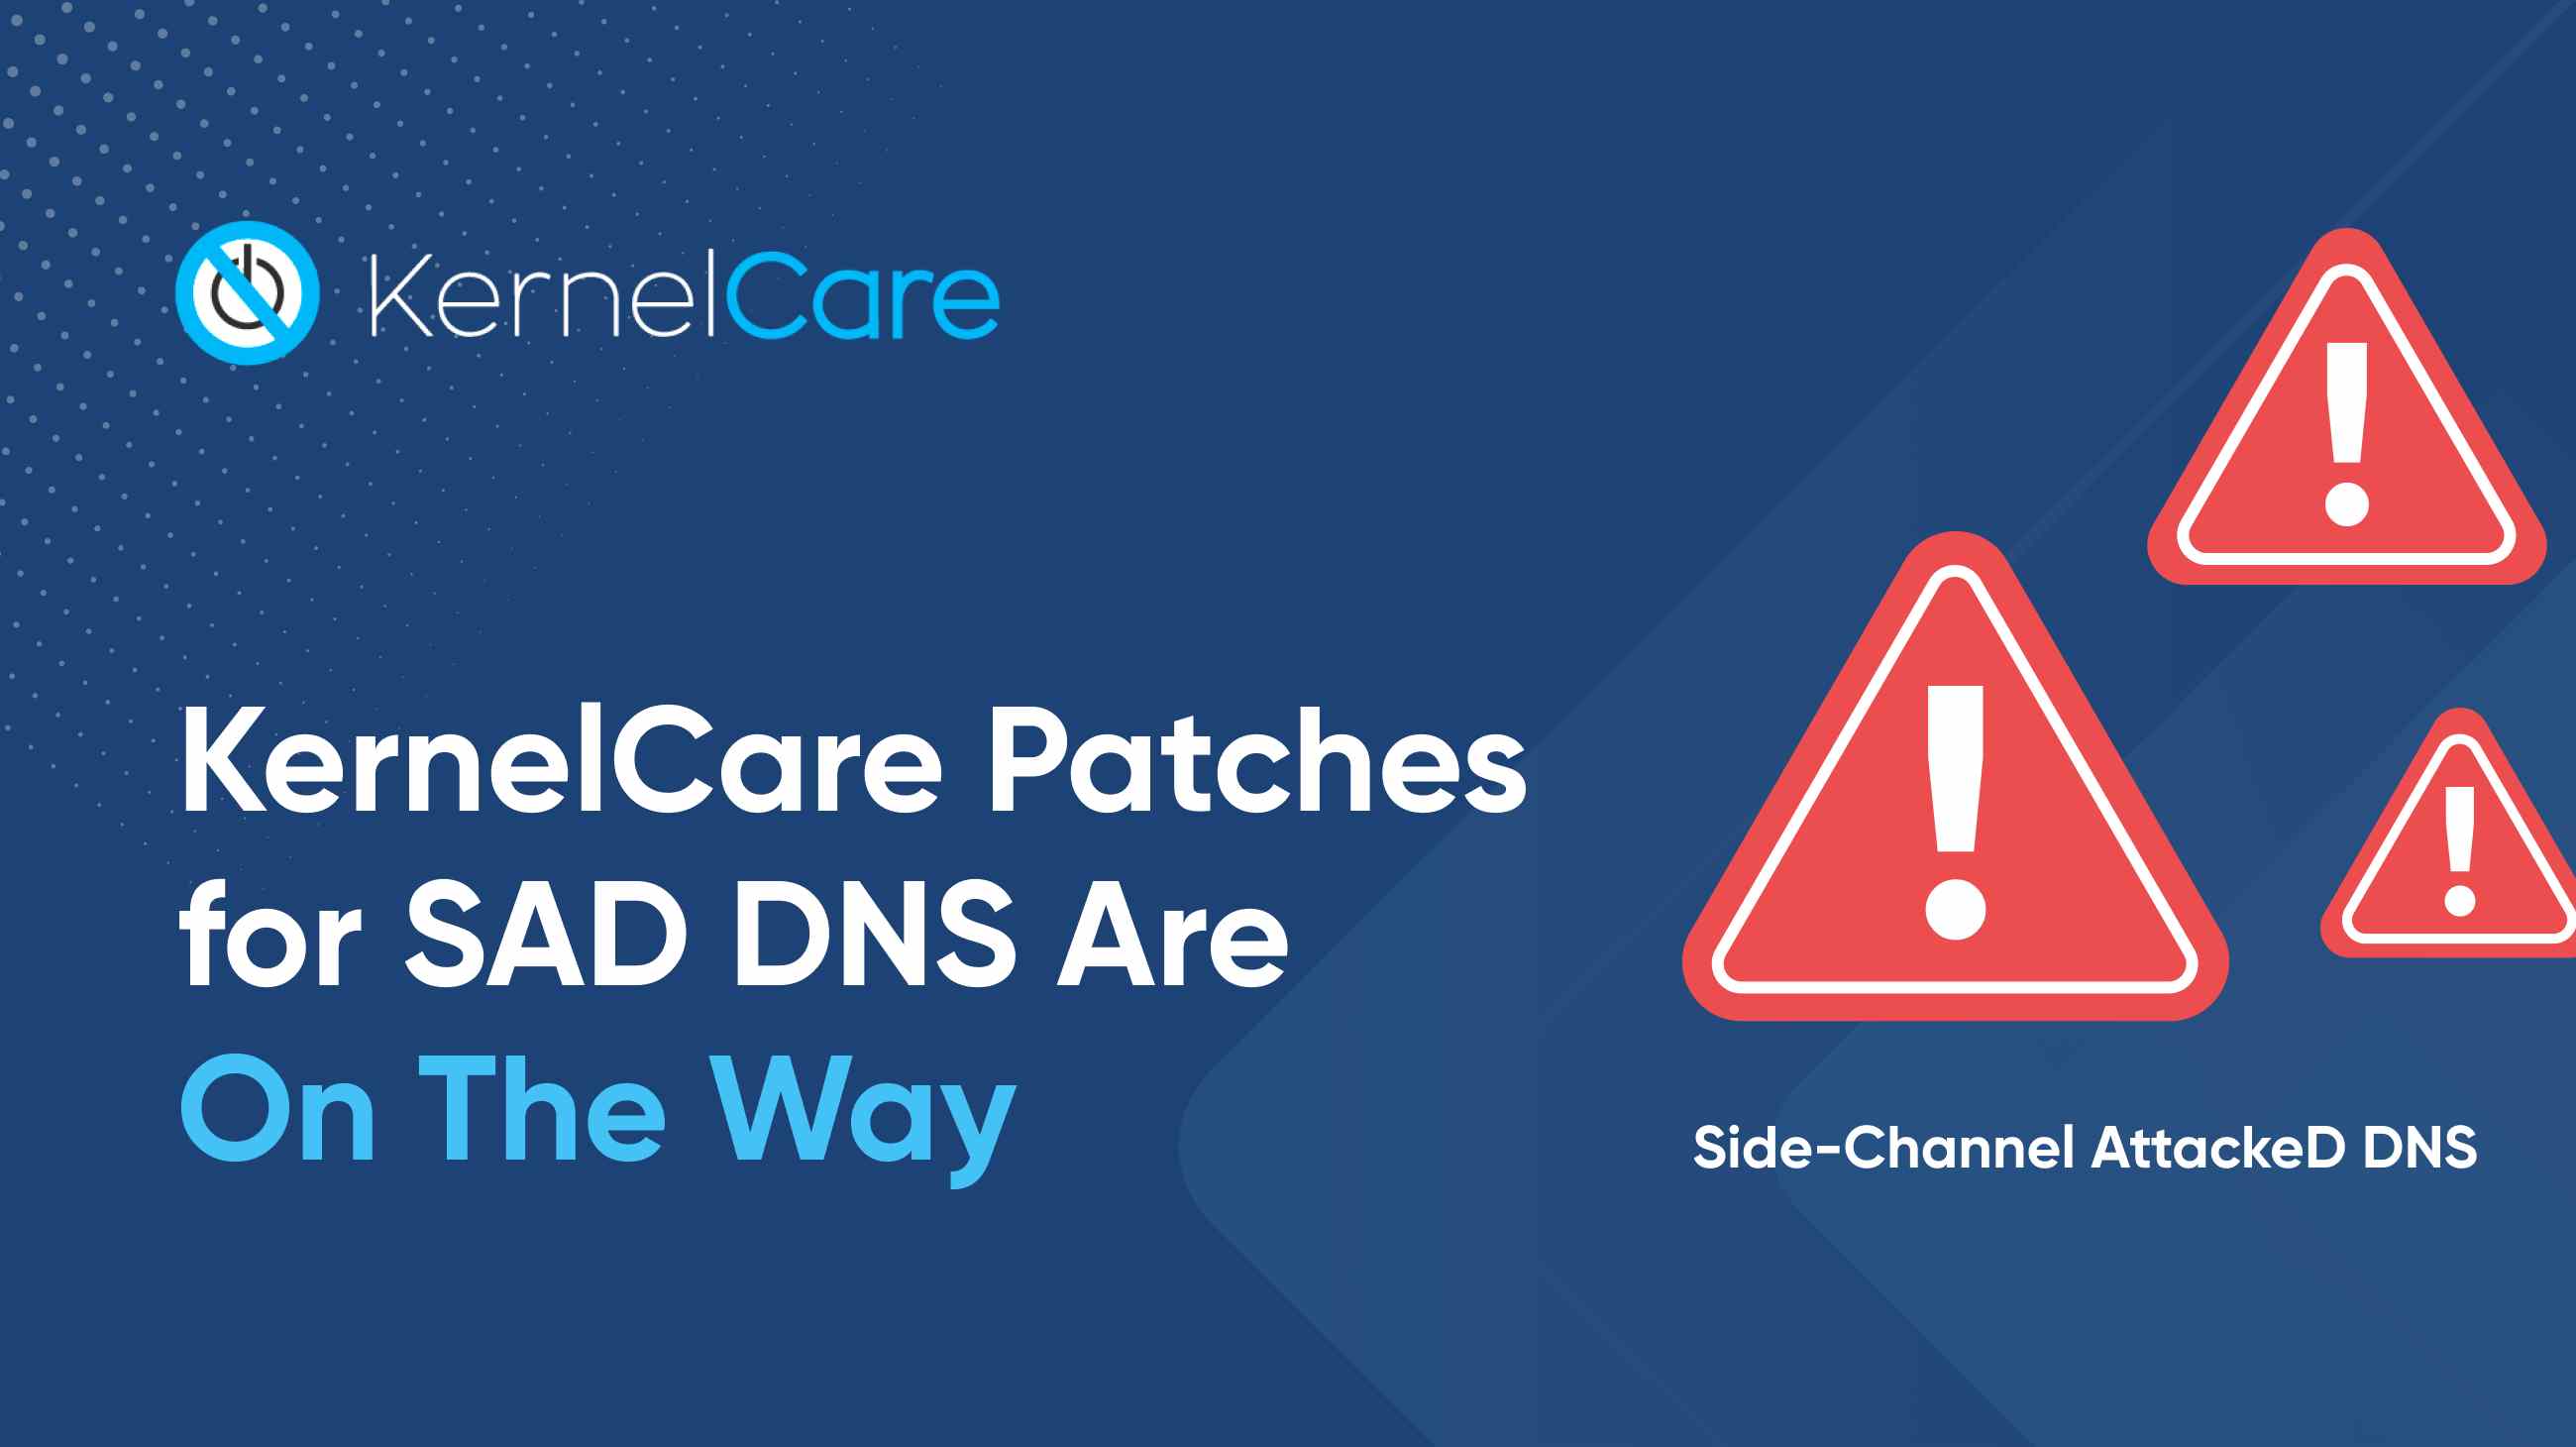 KernelCare Patches for SAD DNS Are On The Way